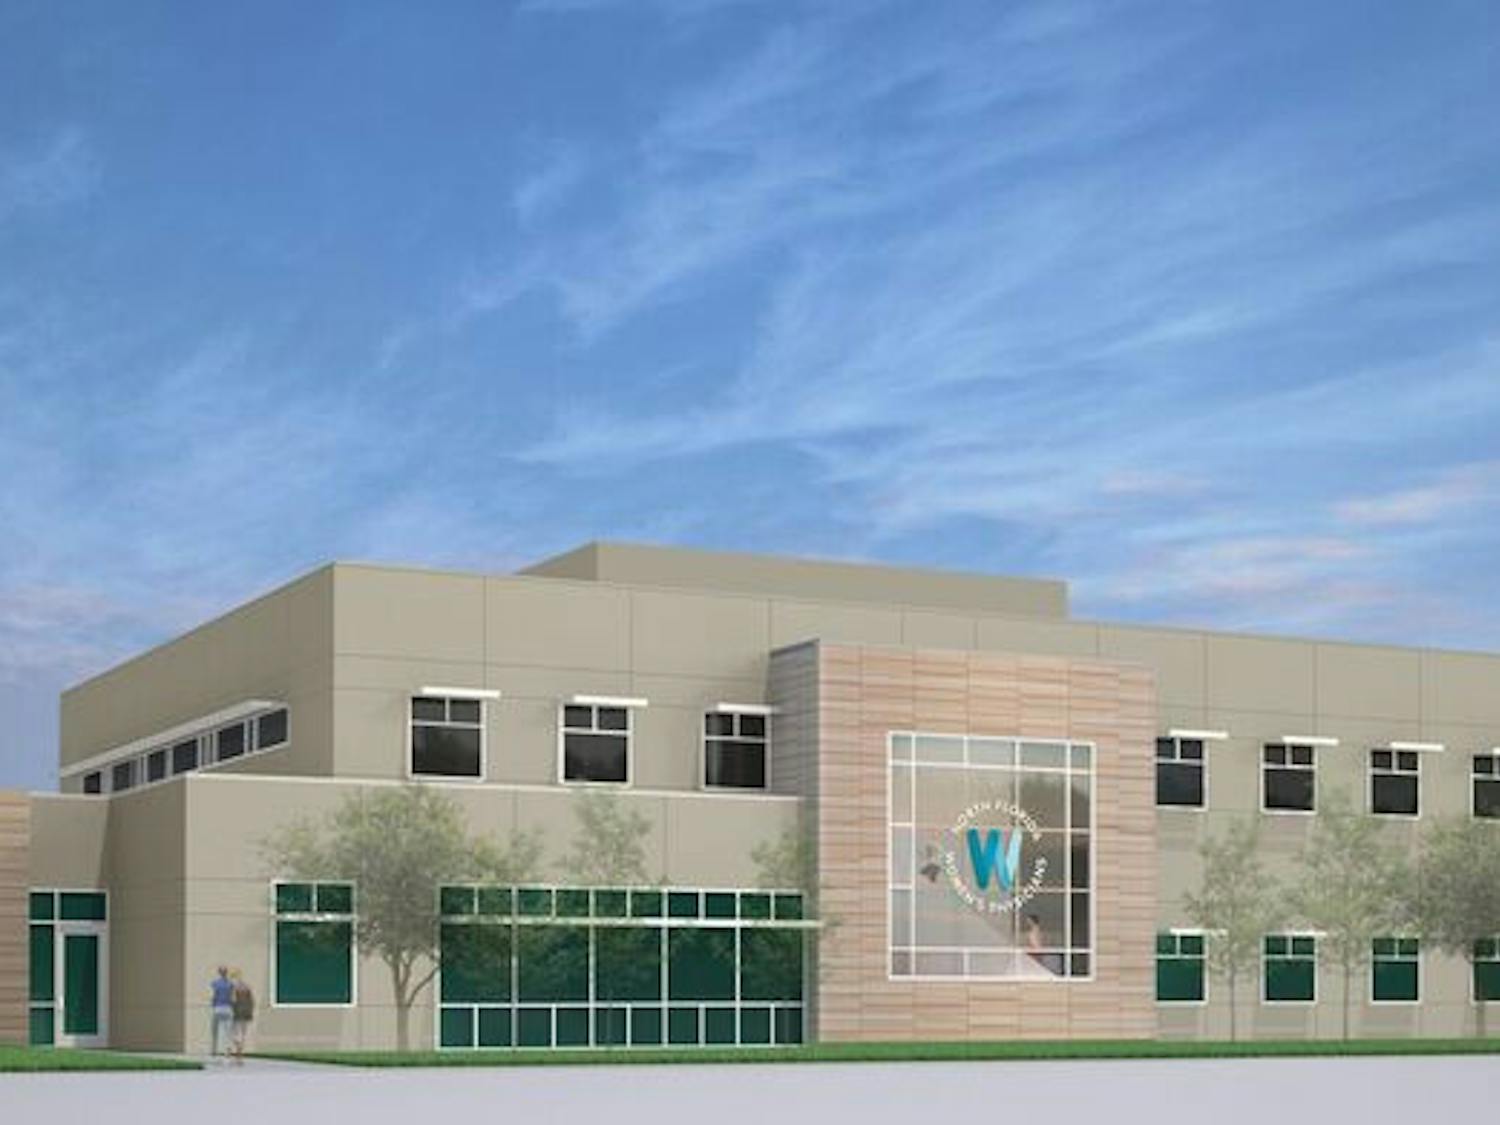 Pictured is a rendering of the new Comprehensive Women's Health facility. Their new building and birth center is scheduled to open November 2018 on Northwest 43rd Street.